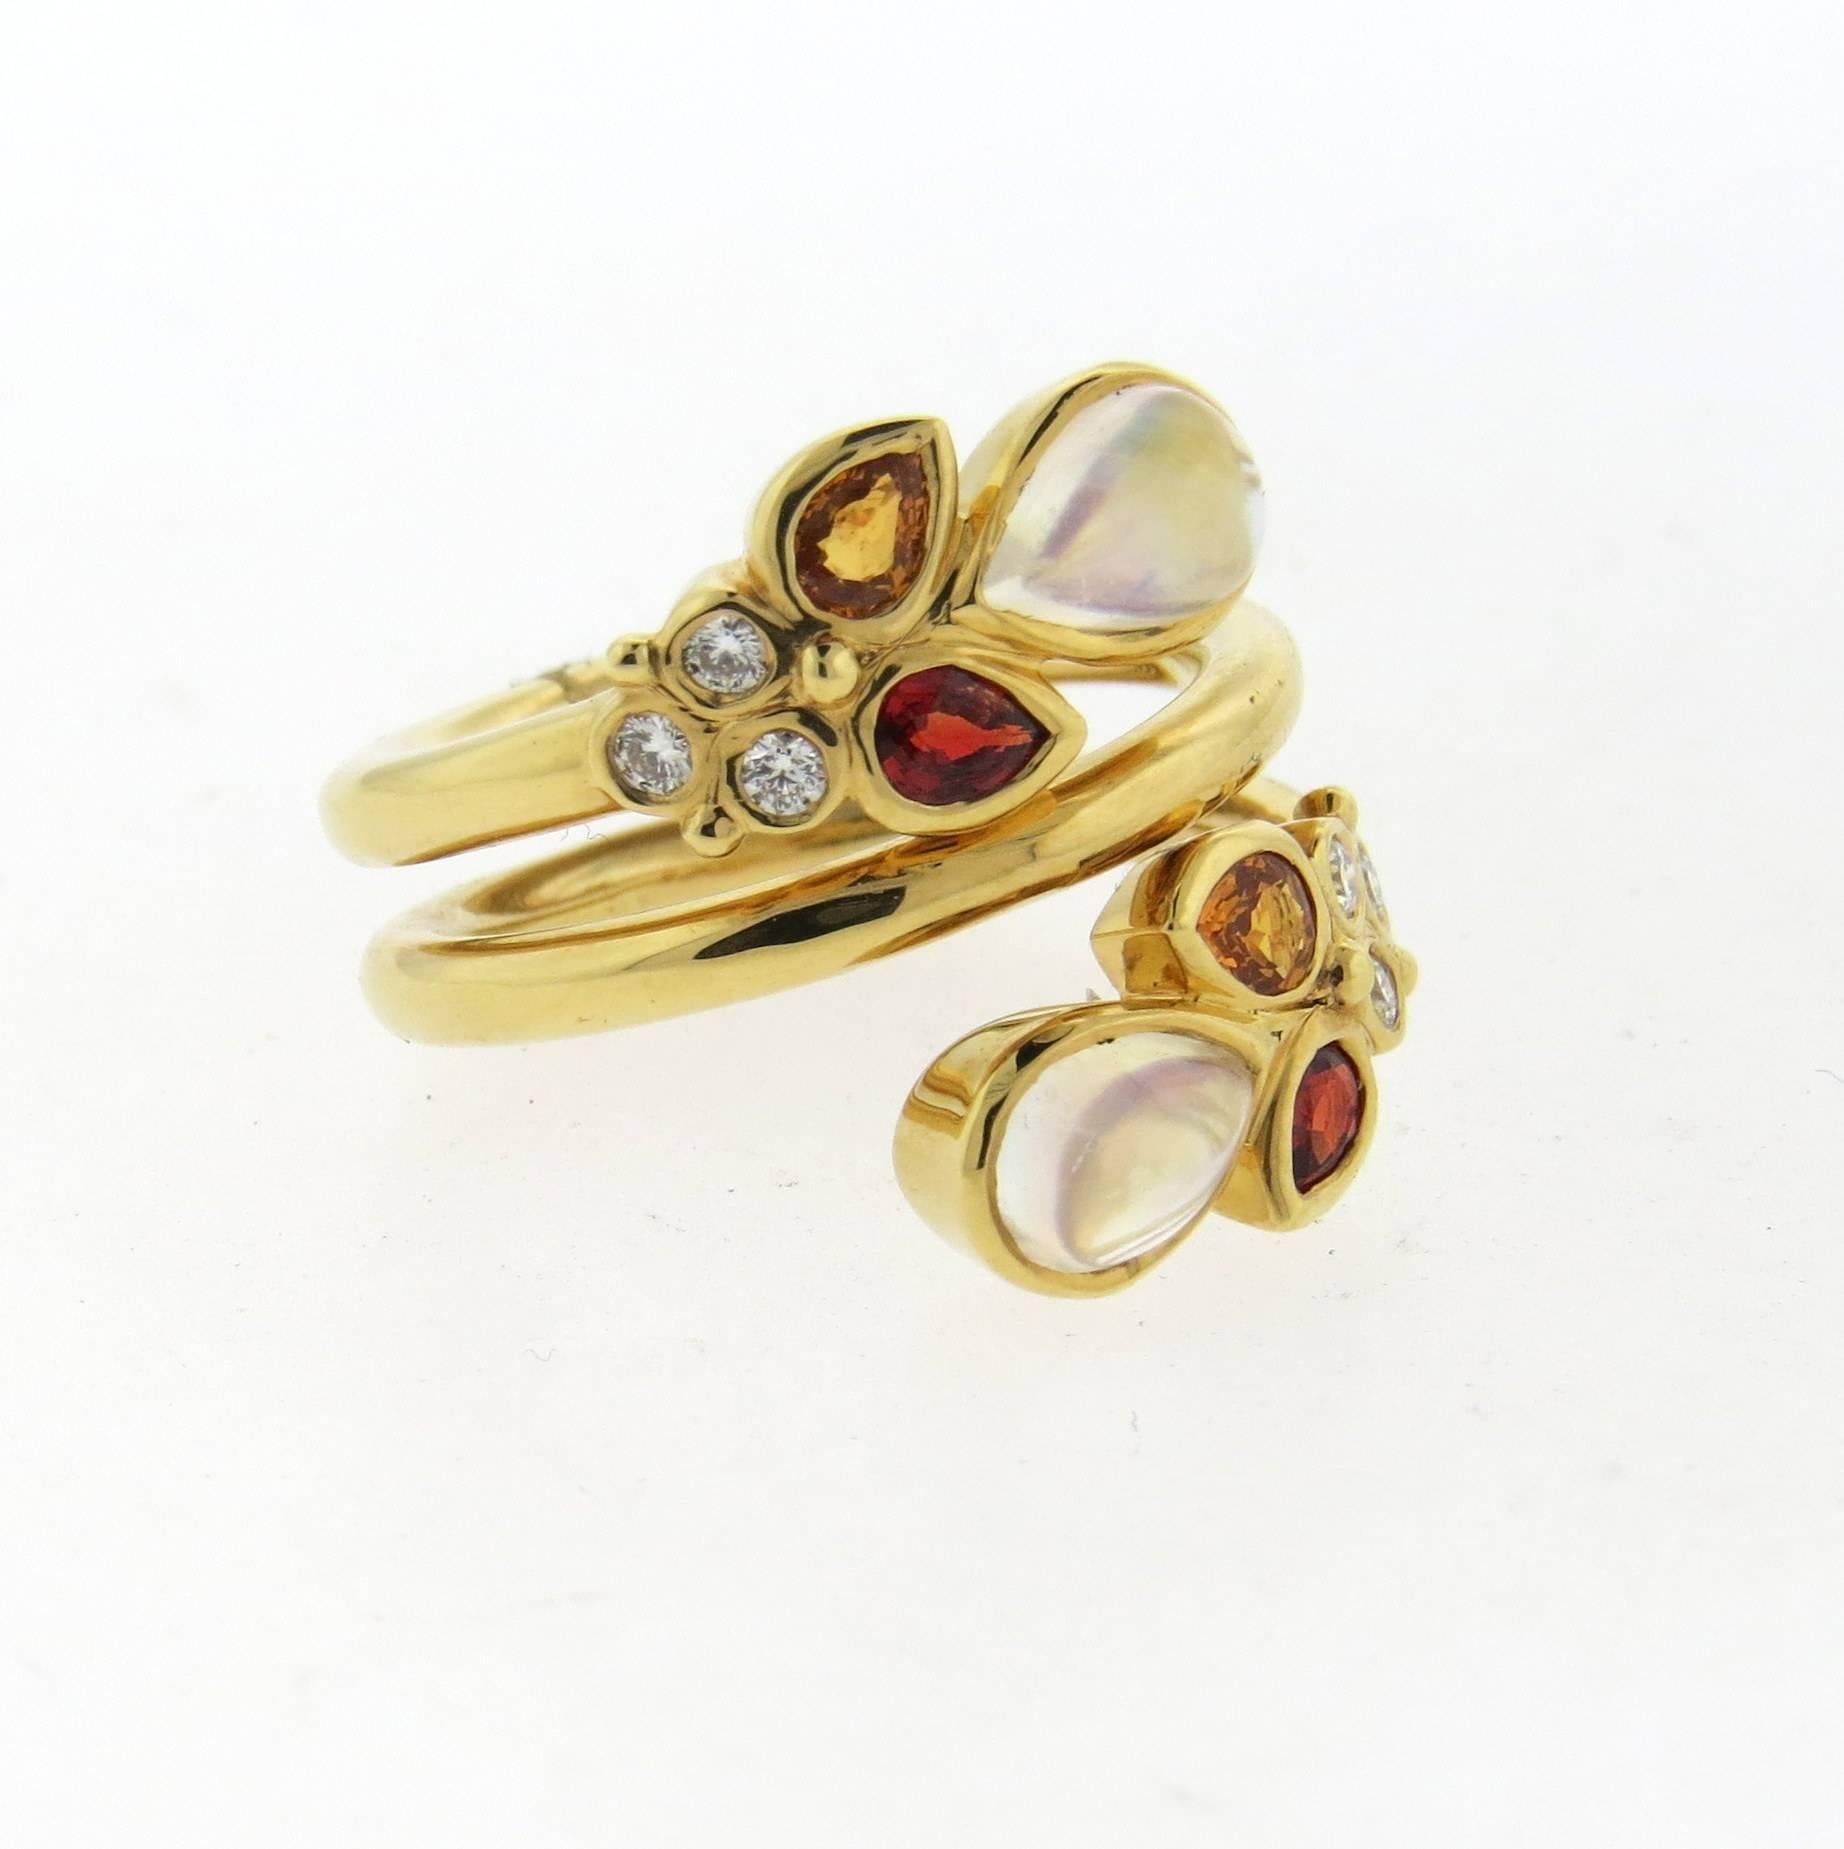 An 18k yellow gold ring, crafted by Temple St. Clair, featuring multi color orange sapphires, diamonds and moonstones. Ring size 7, ring top is 21mm wide. Marked with Temple mark and 750. Weight - 13.1 grams
Retail $5500